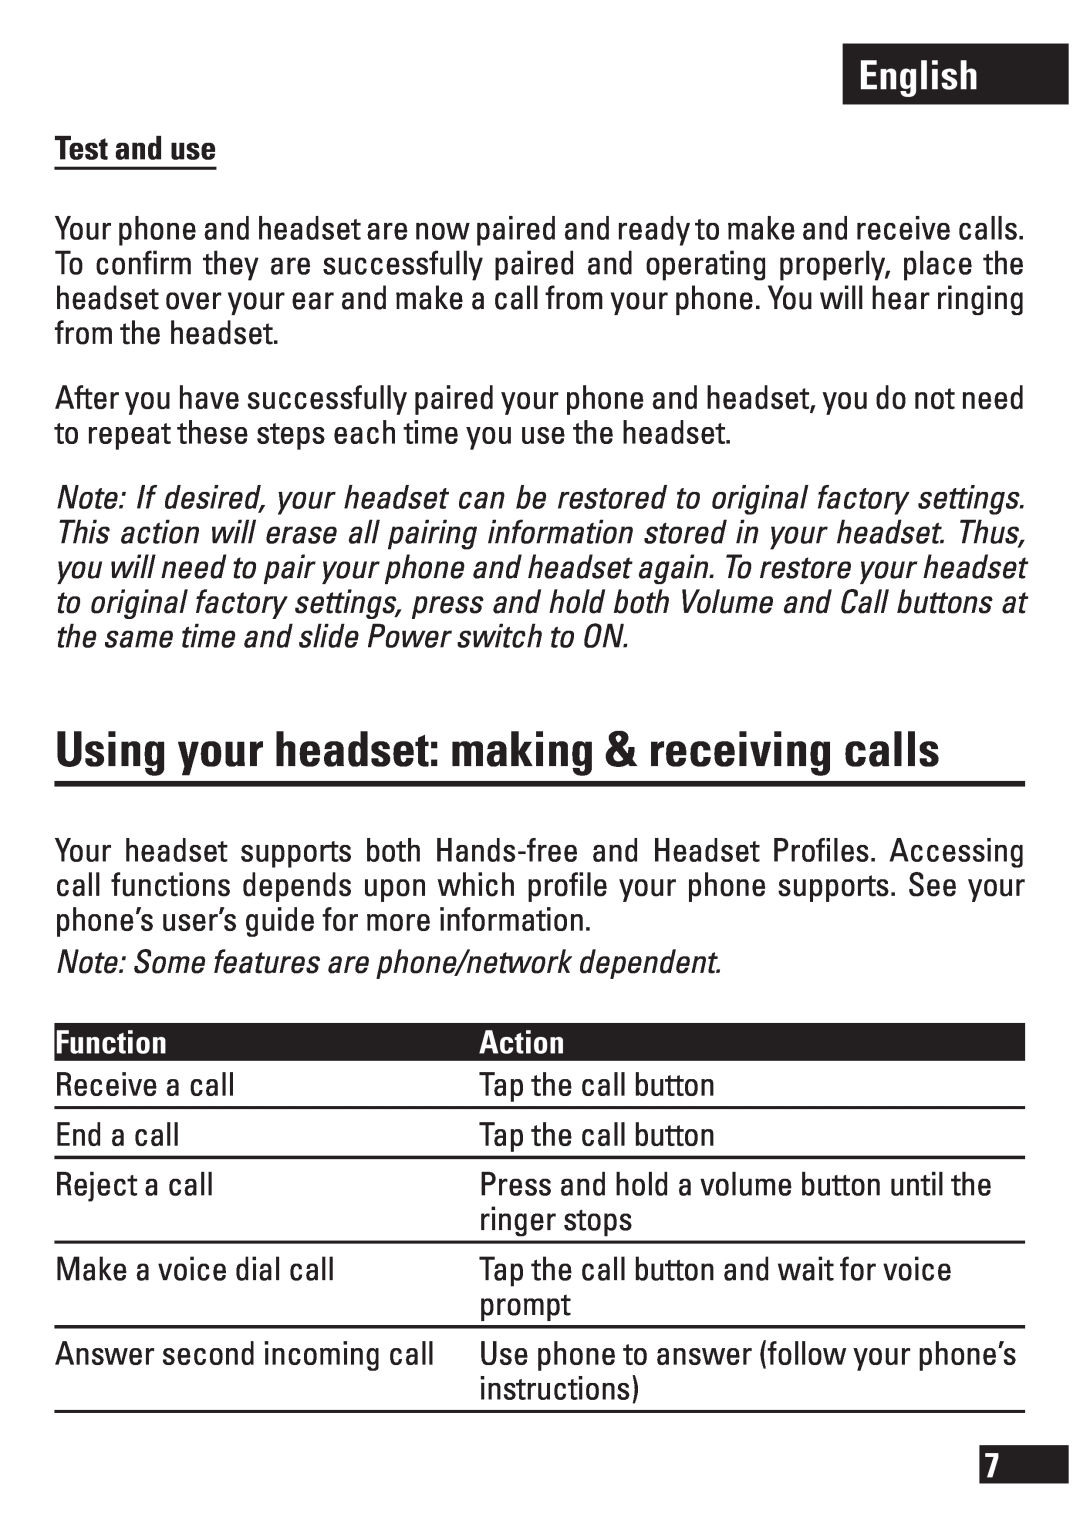 Motorola H270 Using your headset making & receiving calls, Test and use, Note Some features are phone/network dependent 